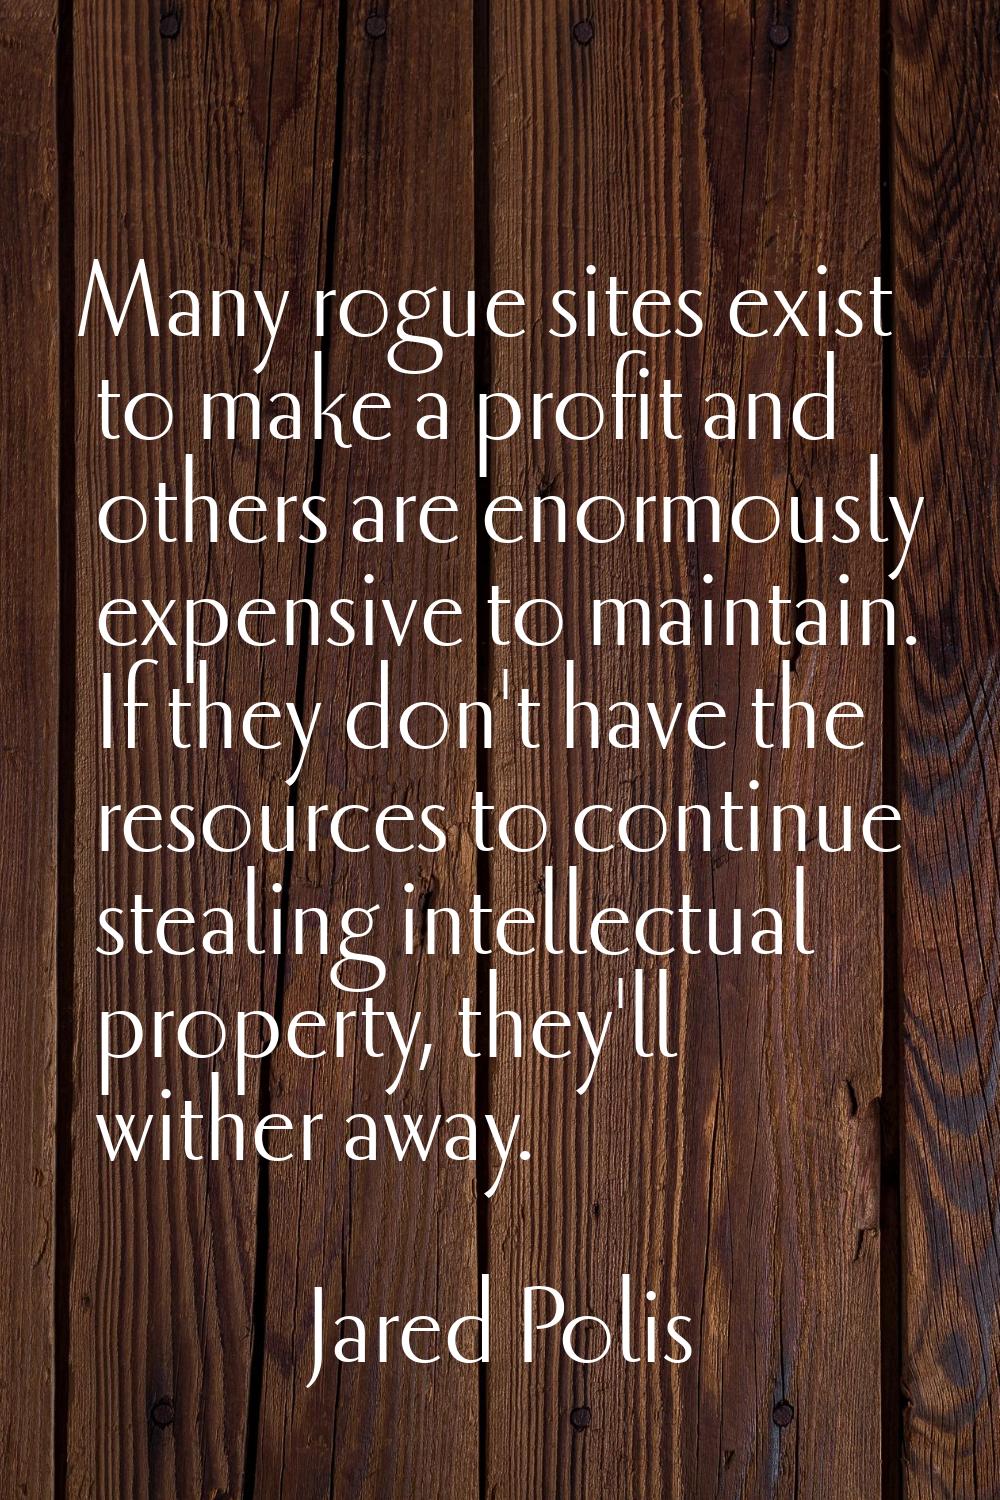 Many rogue sites exist to make a profit and others are enormously expensive to maintain. If they do